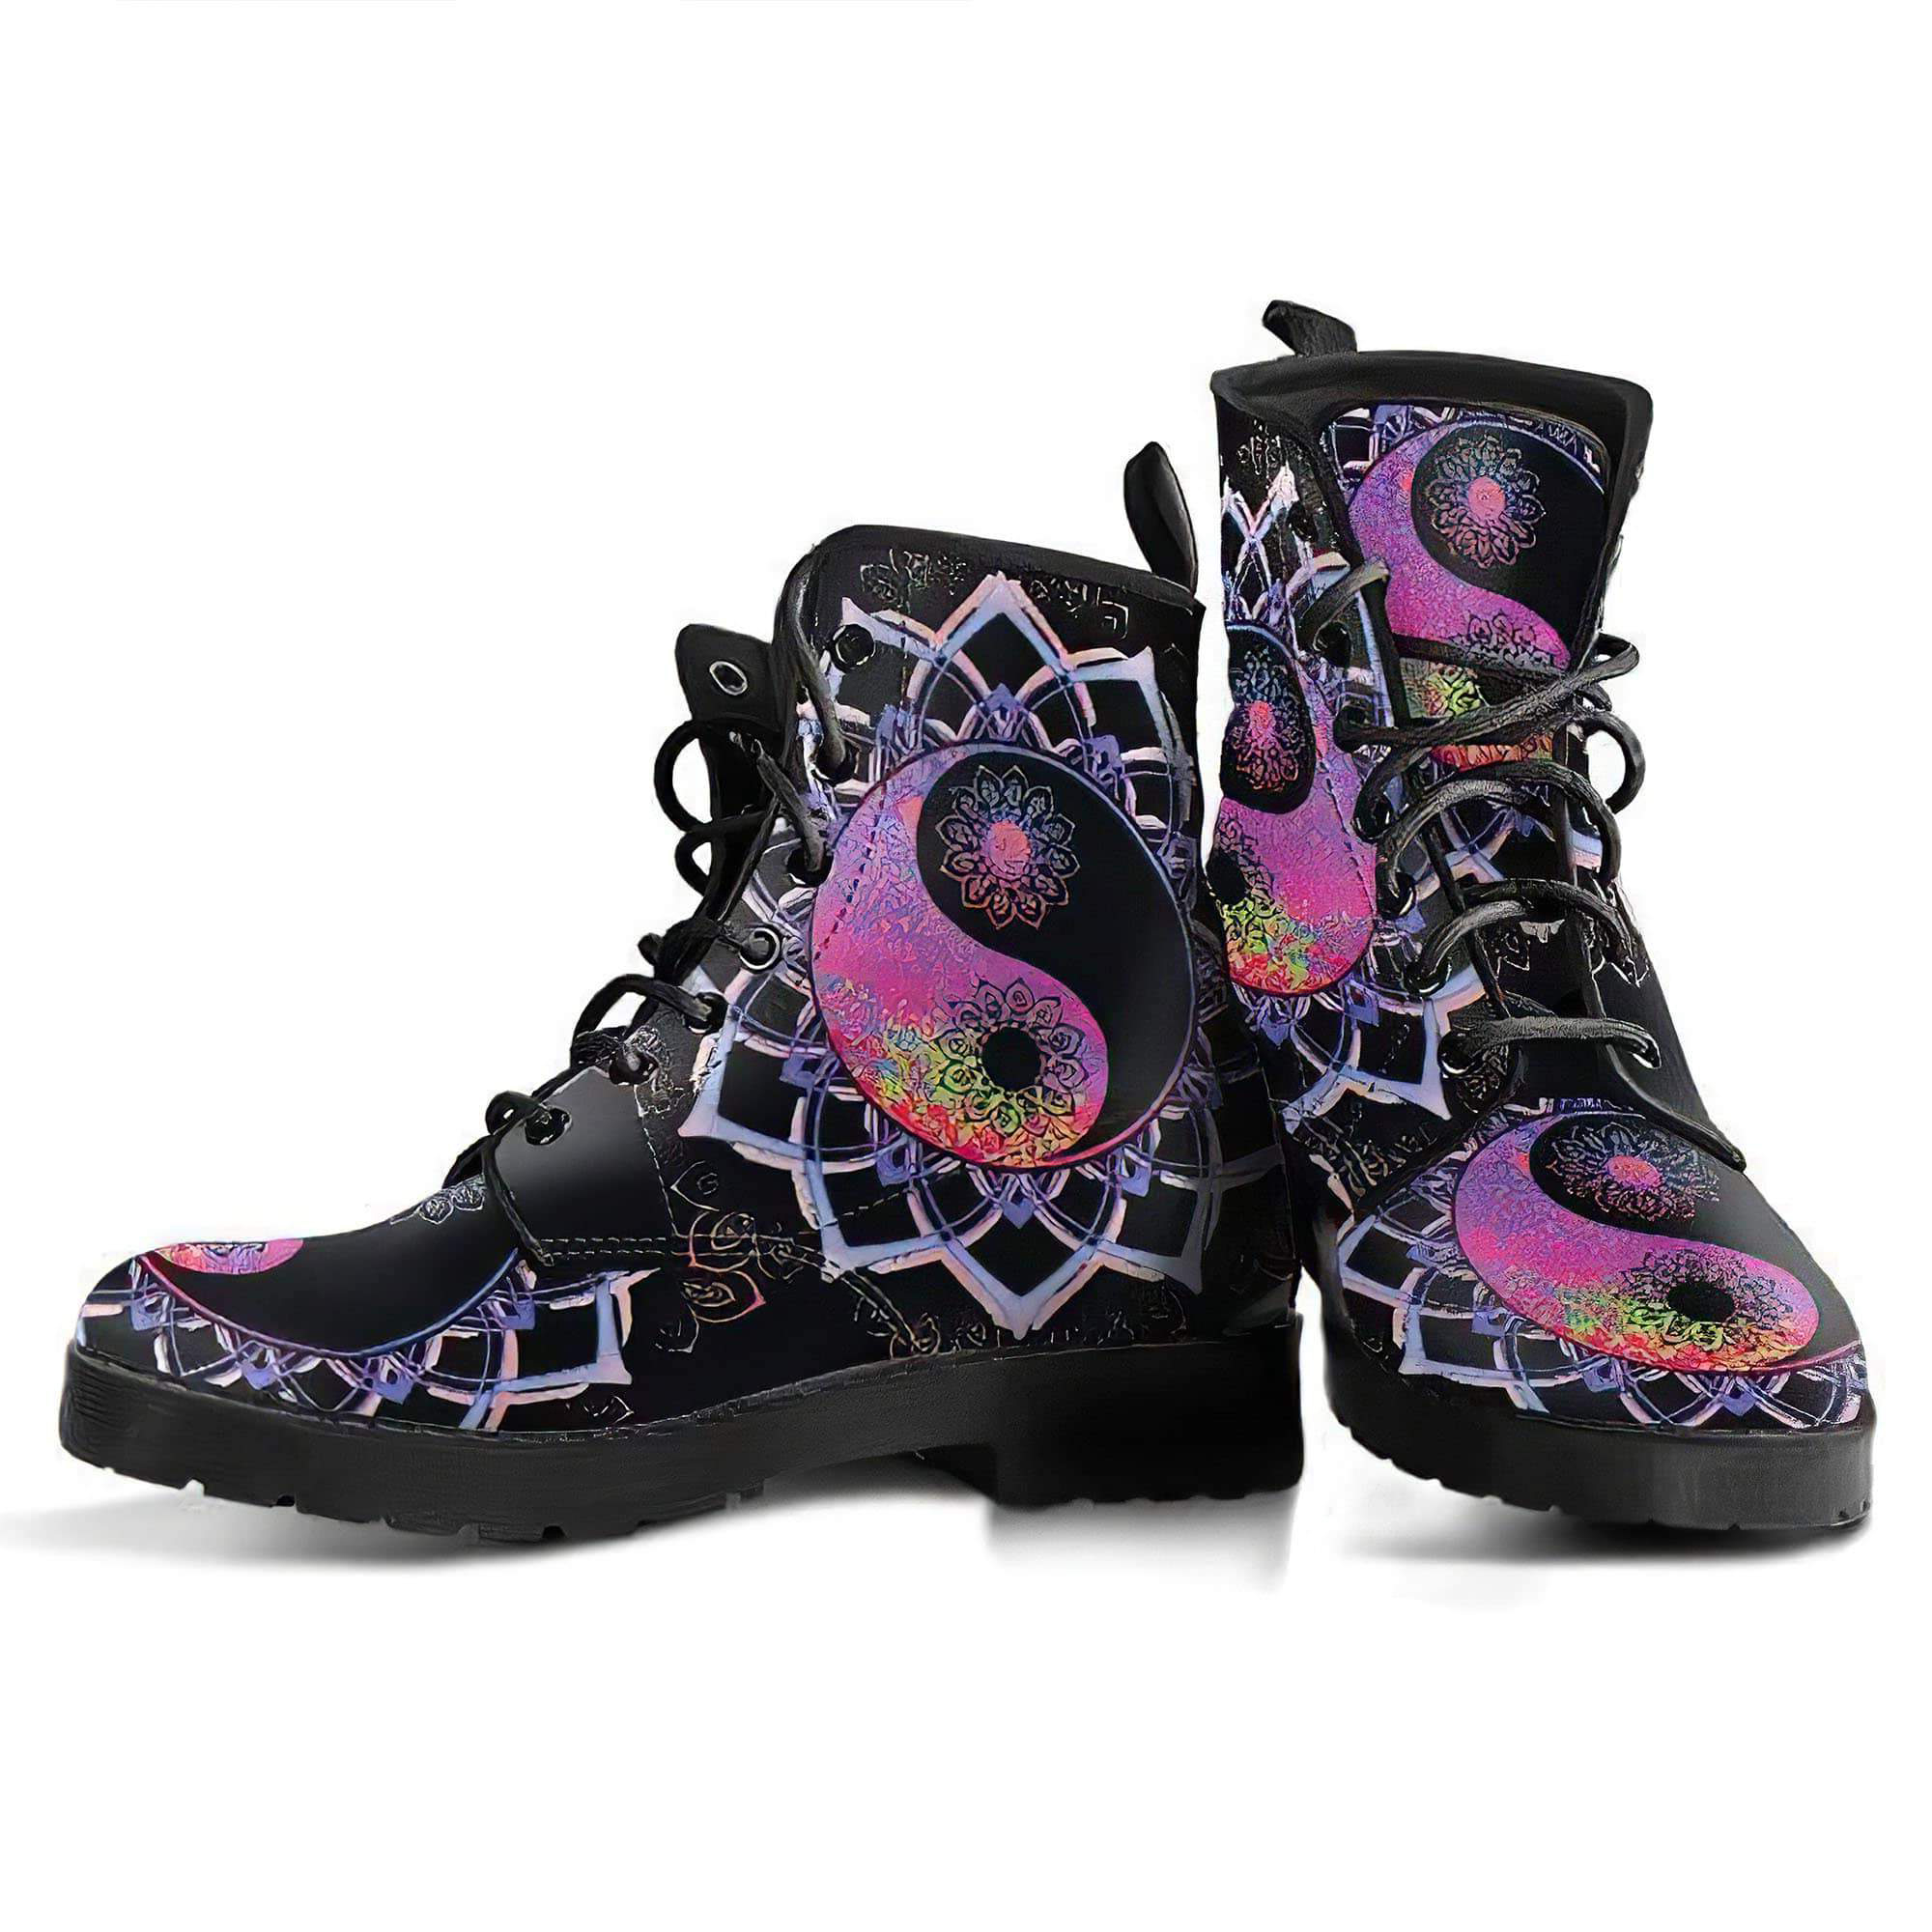 yinyang-mandala-2-handcrafted-boots-women-s-leather-boots-12051982647357.jpg